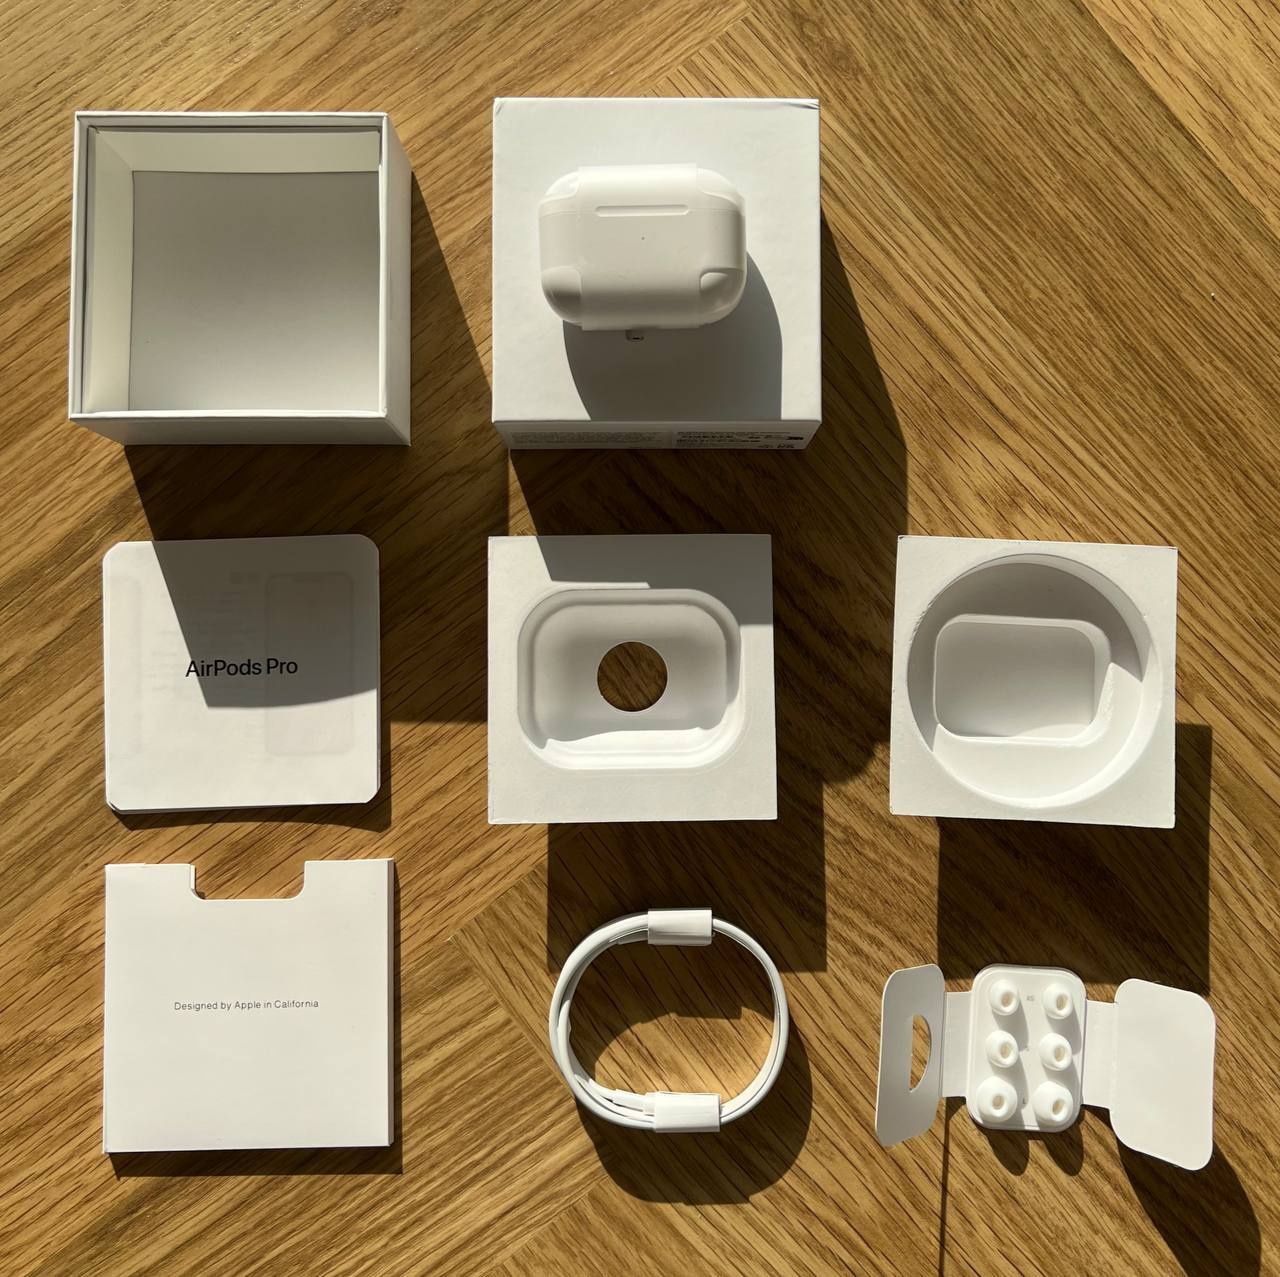 apple airpods pro 1:1